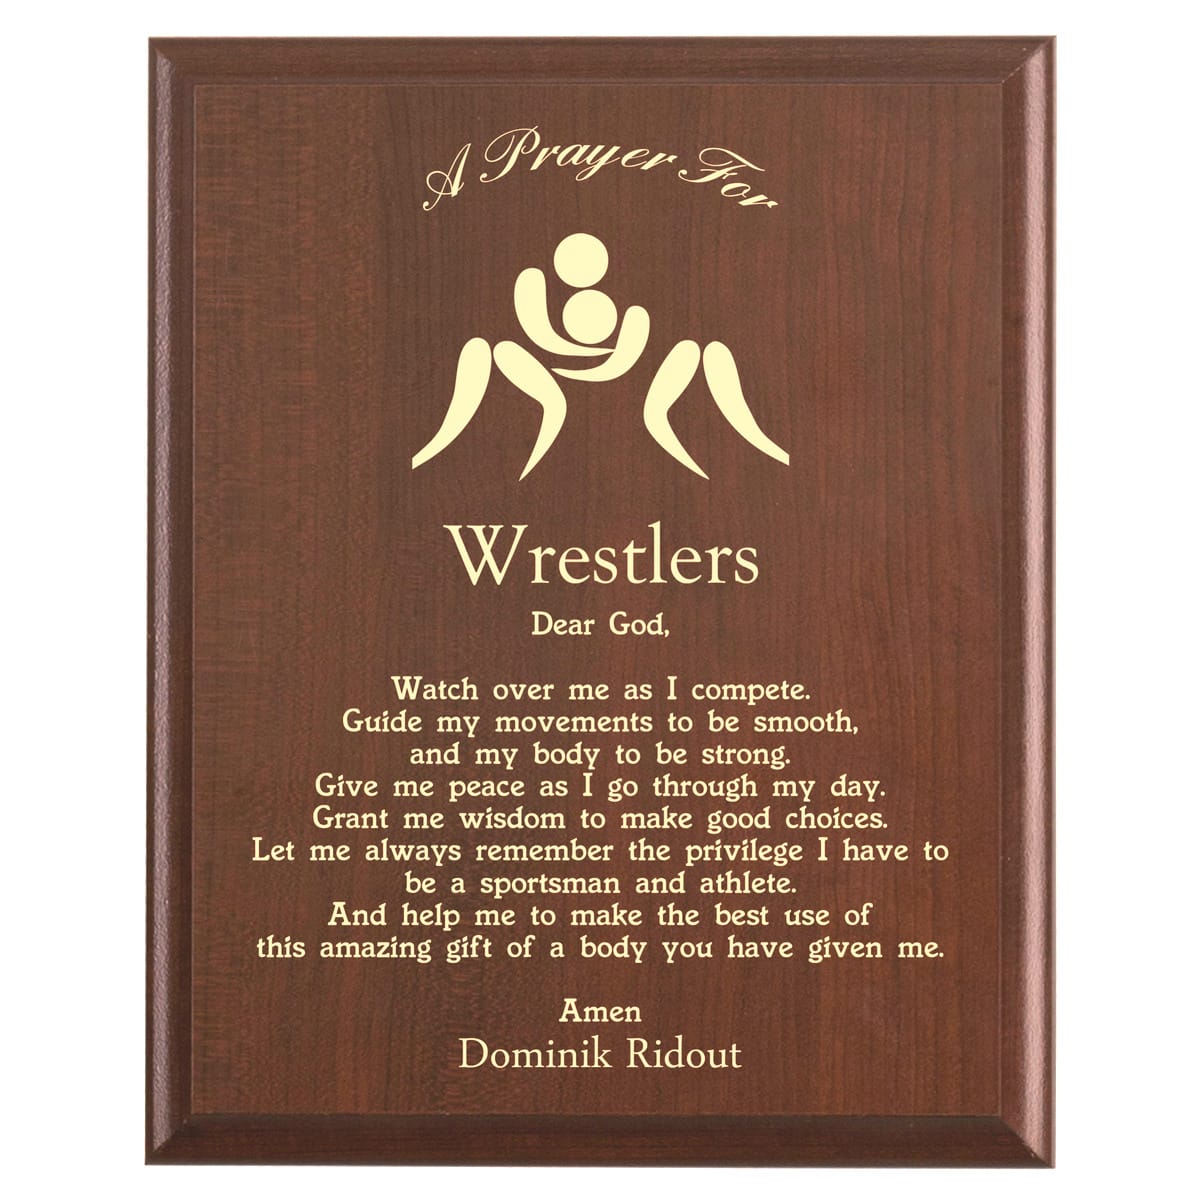 Plaque photo: Wrestler Prayer Plaque design with free personalization. Wood style finish with customized text.